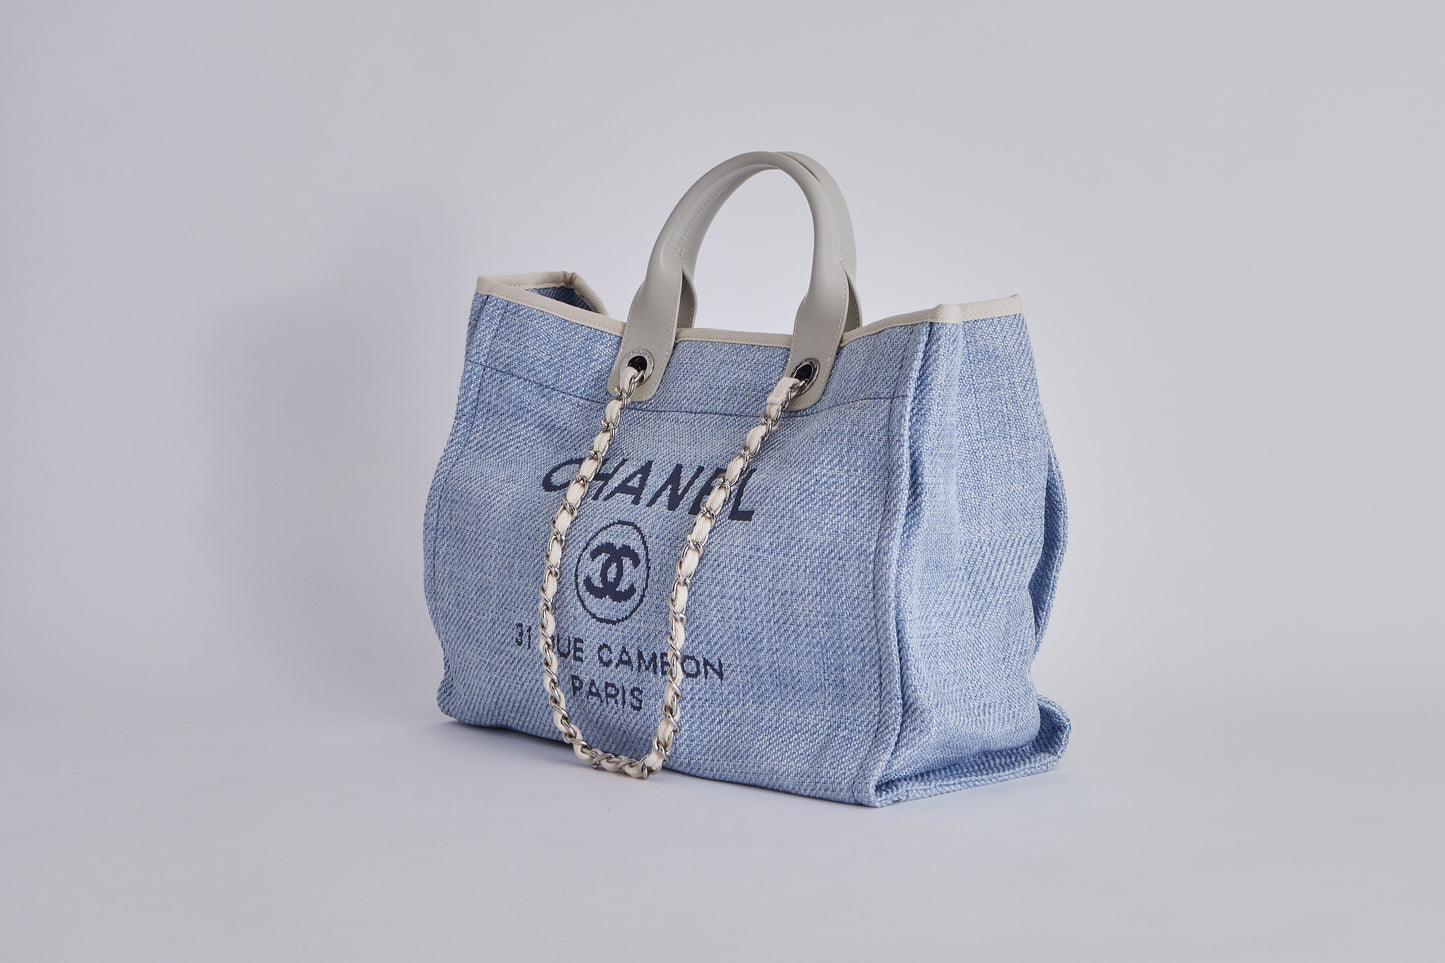 Chanel Tweed Tote